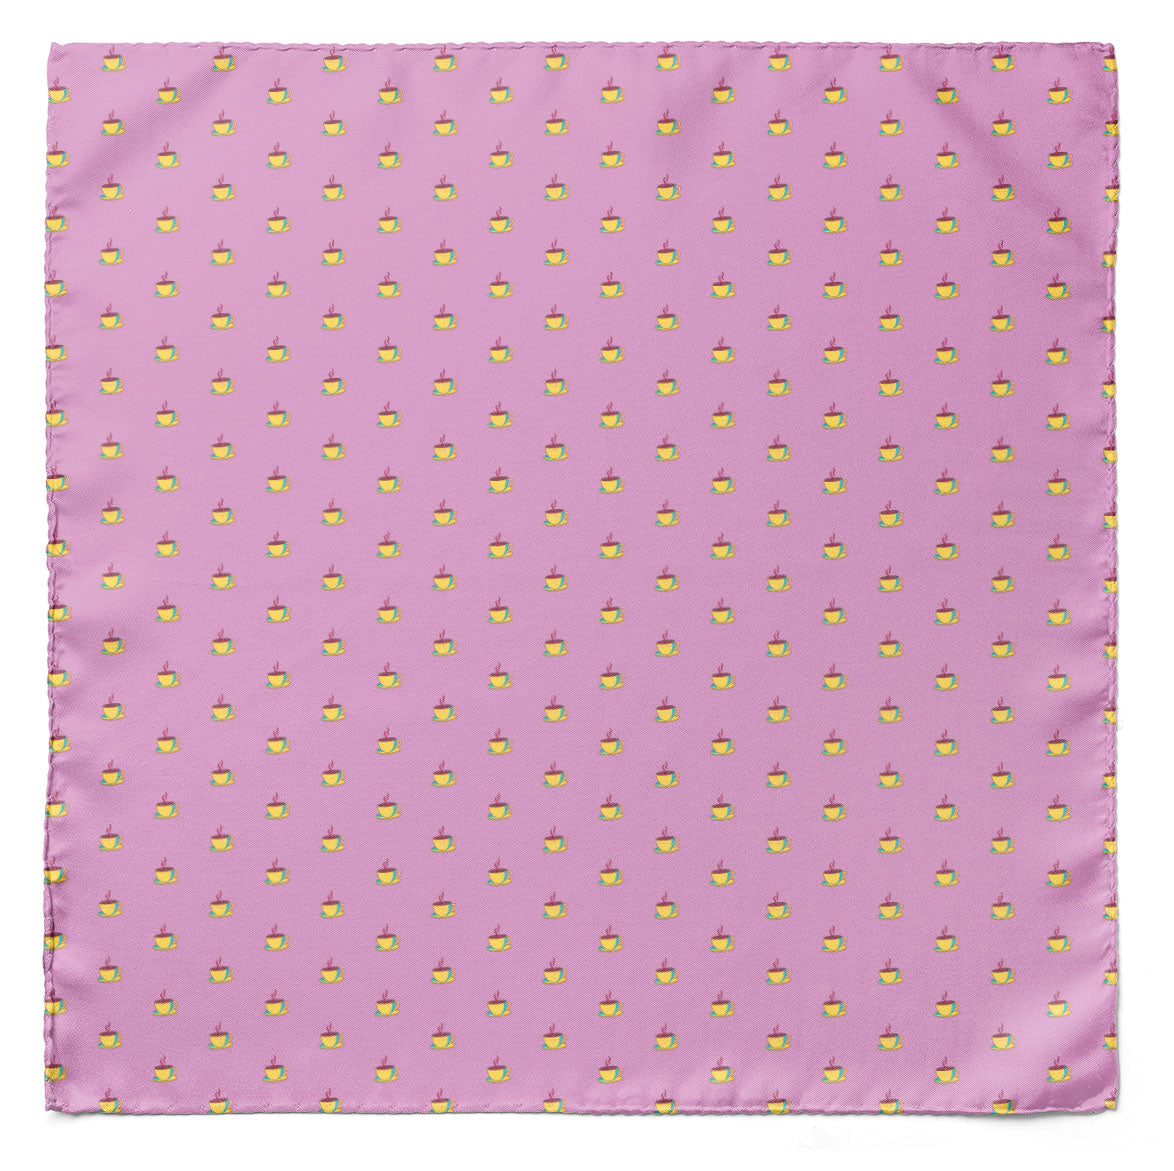 THE PINK TEA PARTY SILK SCARF